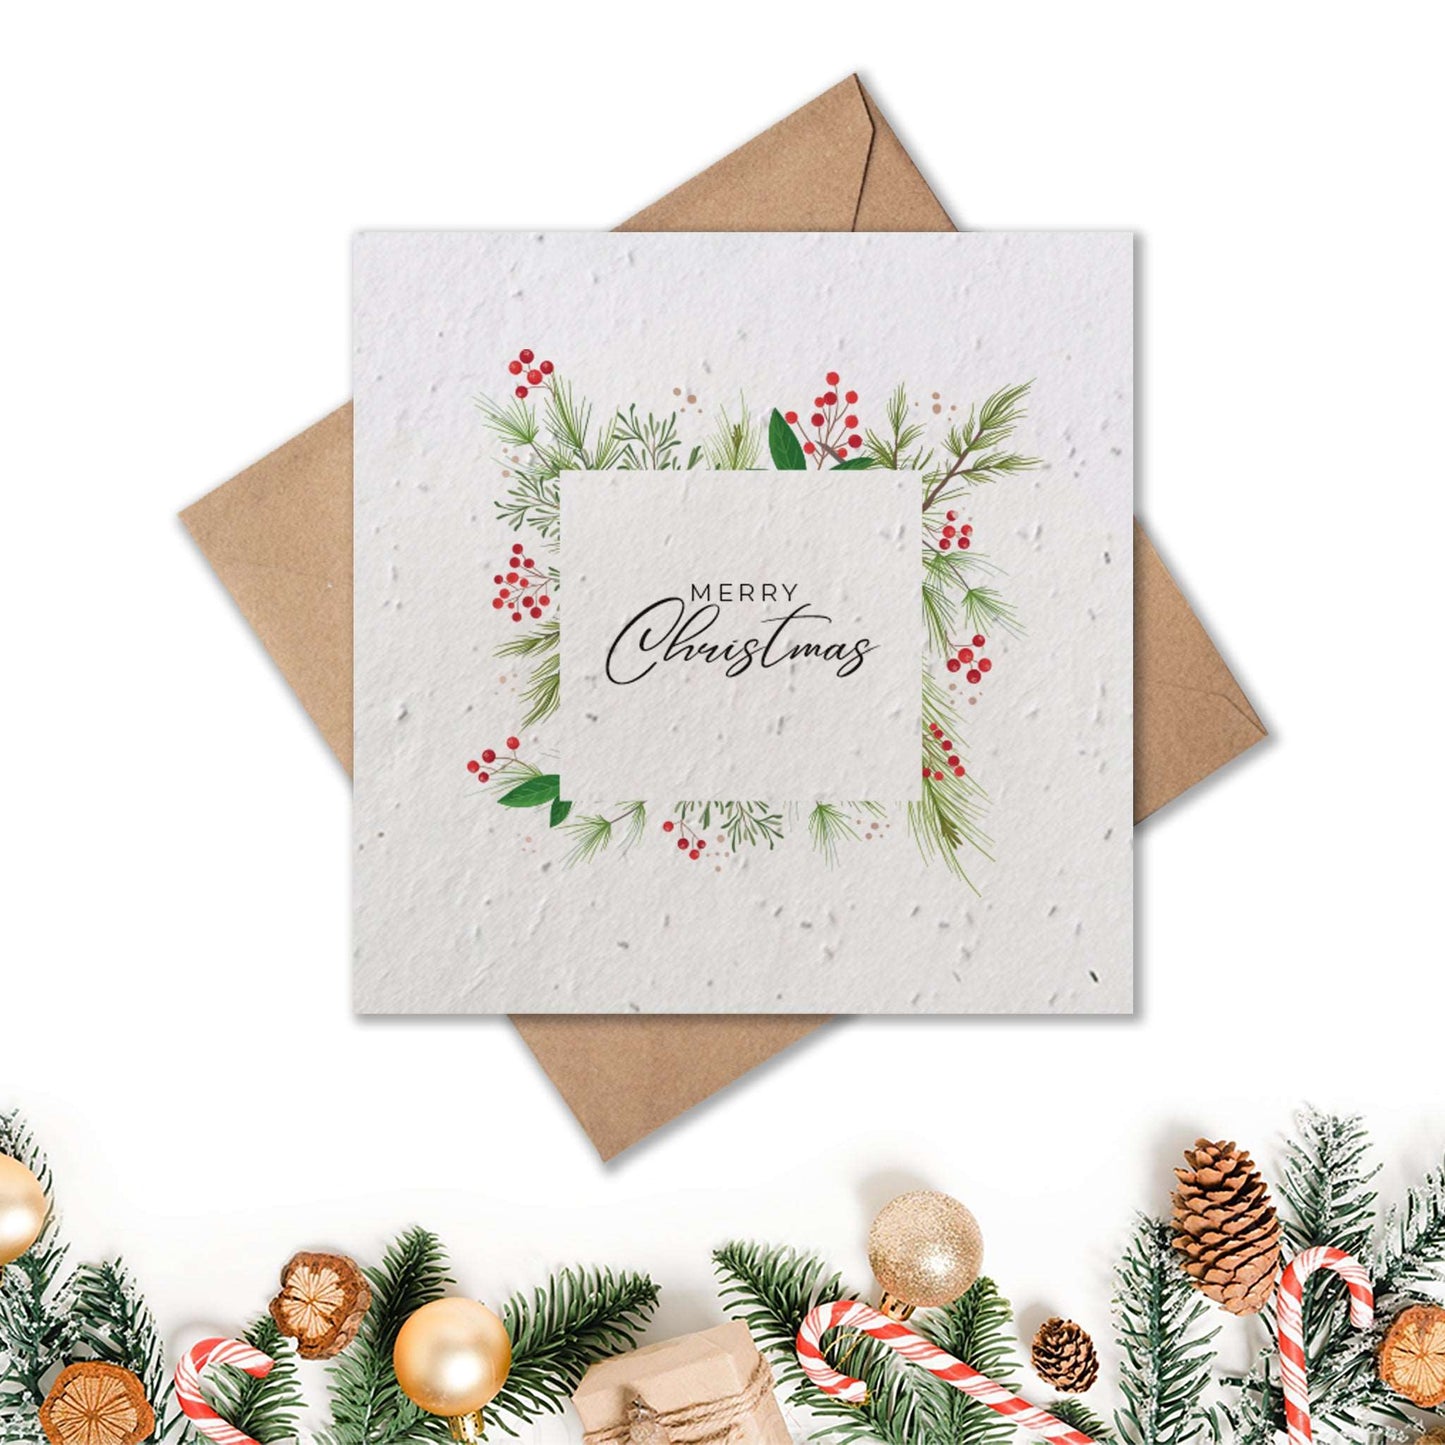 Plantable Seed Paper Christmas Card - Mistletoe Greeting Card Little Green Paper Shop